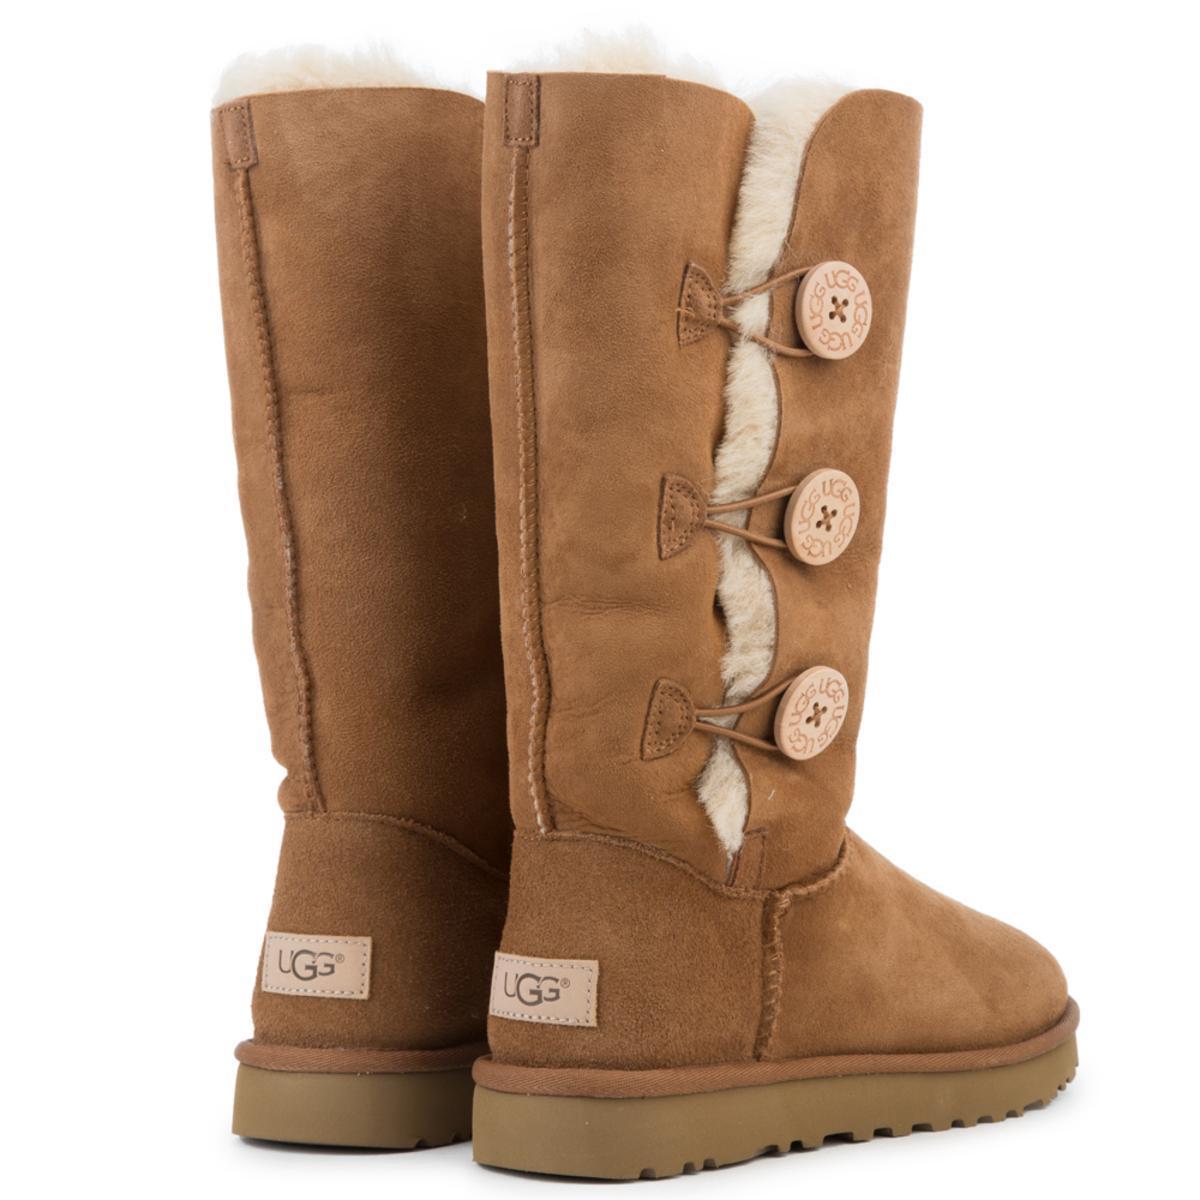 UGG Suede Bailey Button Triplet Ii in Chestnut (Brown) - Save 20% - Lyst